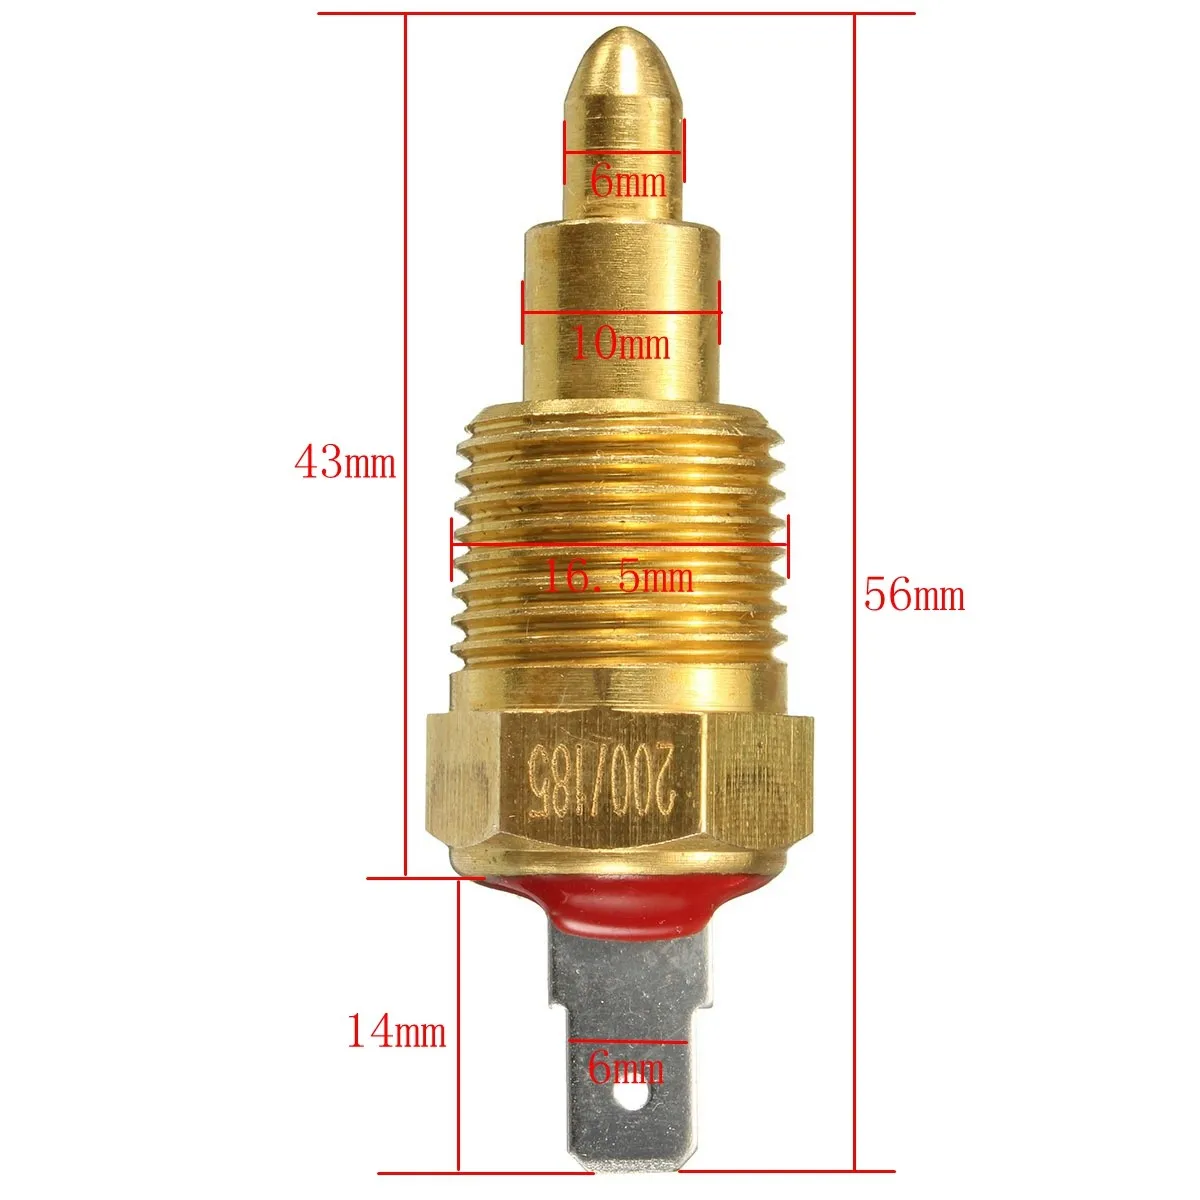 185 to 175 Degree Electric Engine Cooling Fan Thermostat Temperature Sensor Switch CØLIPSØ Fan Thermostat Temperature Switch with 3/8 inch Pipe Thread 